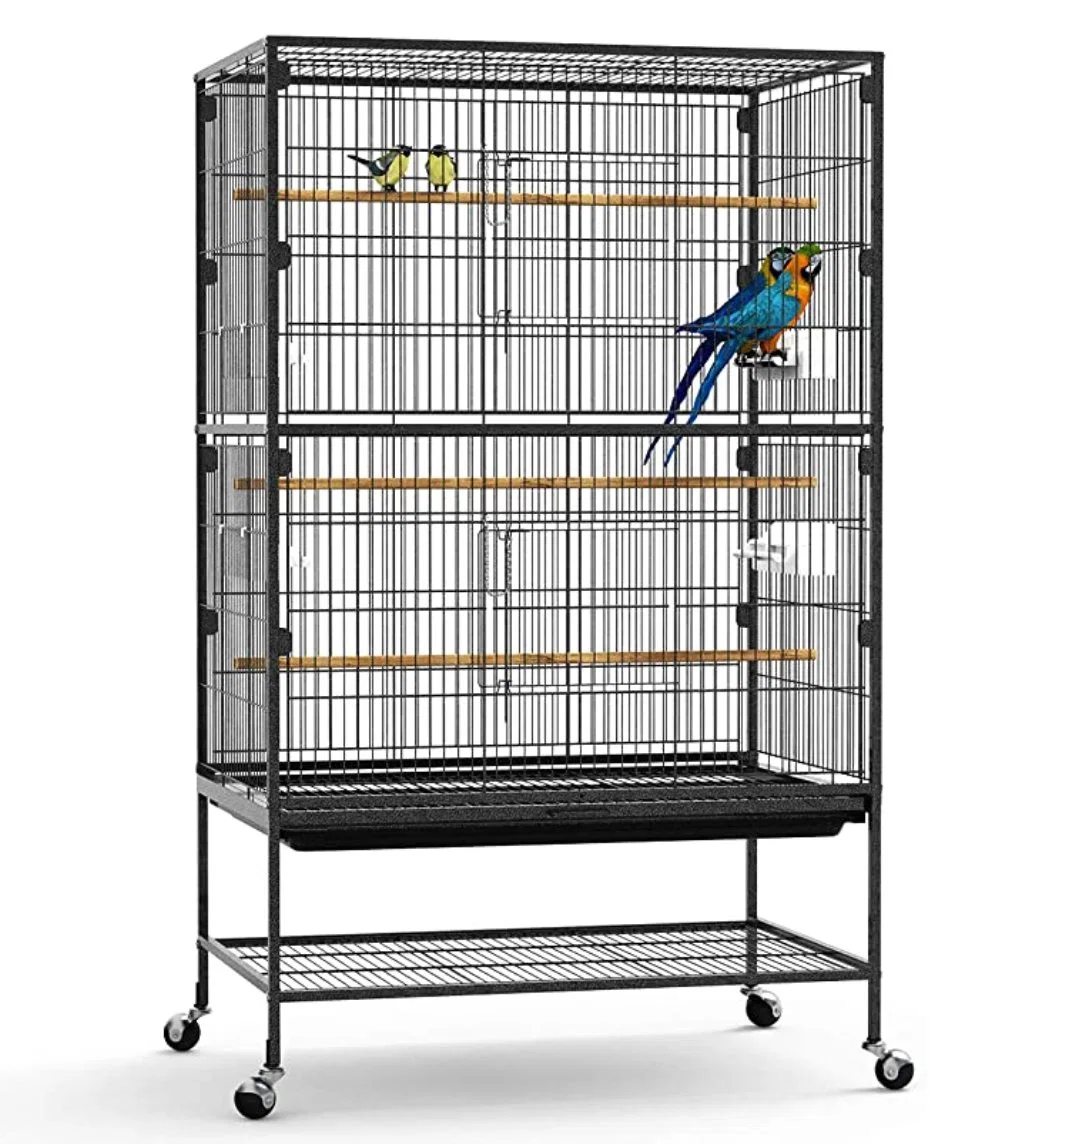 Chinese Wholesale/Suppliers Steel Wire Bird Breeding Cage with Skirt Wheels for Pet Bird Parrot Canary